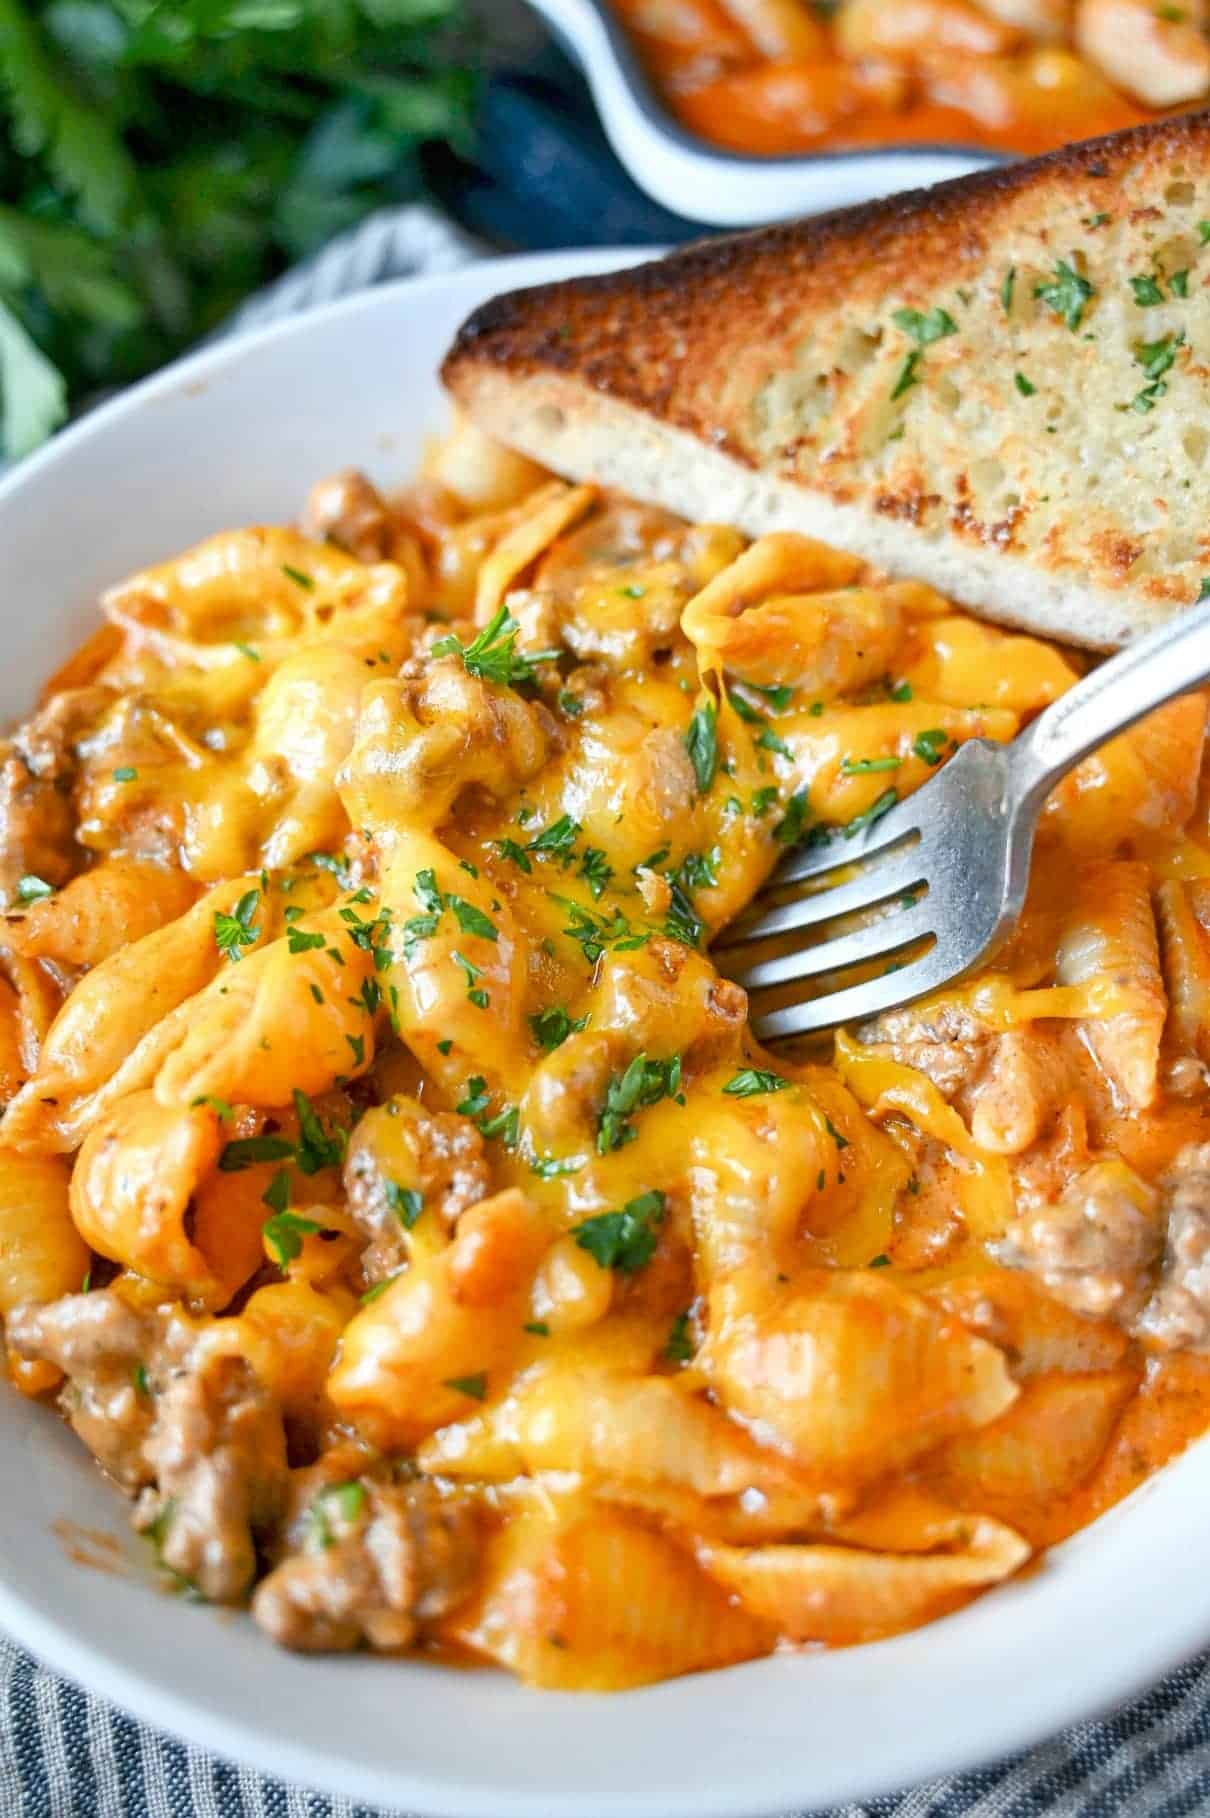 Creamy beef and pasta in a white bowl with a fork going into it and a side of garlic bread.